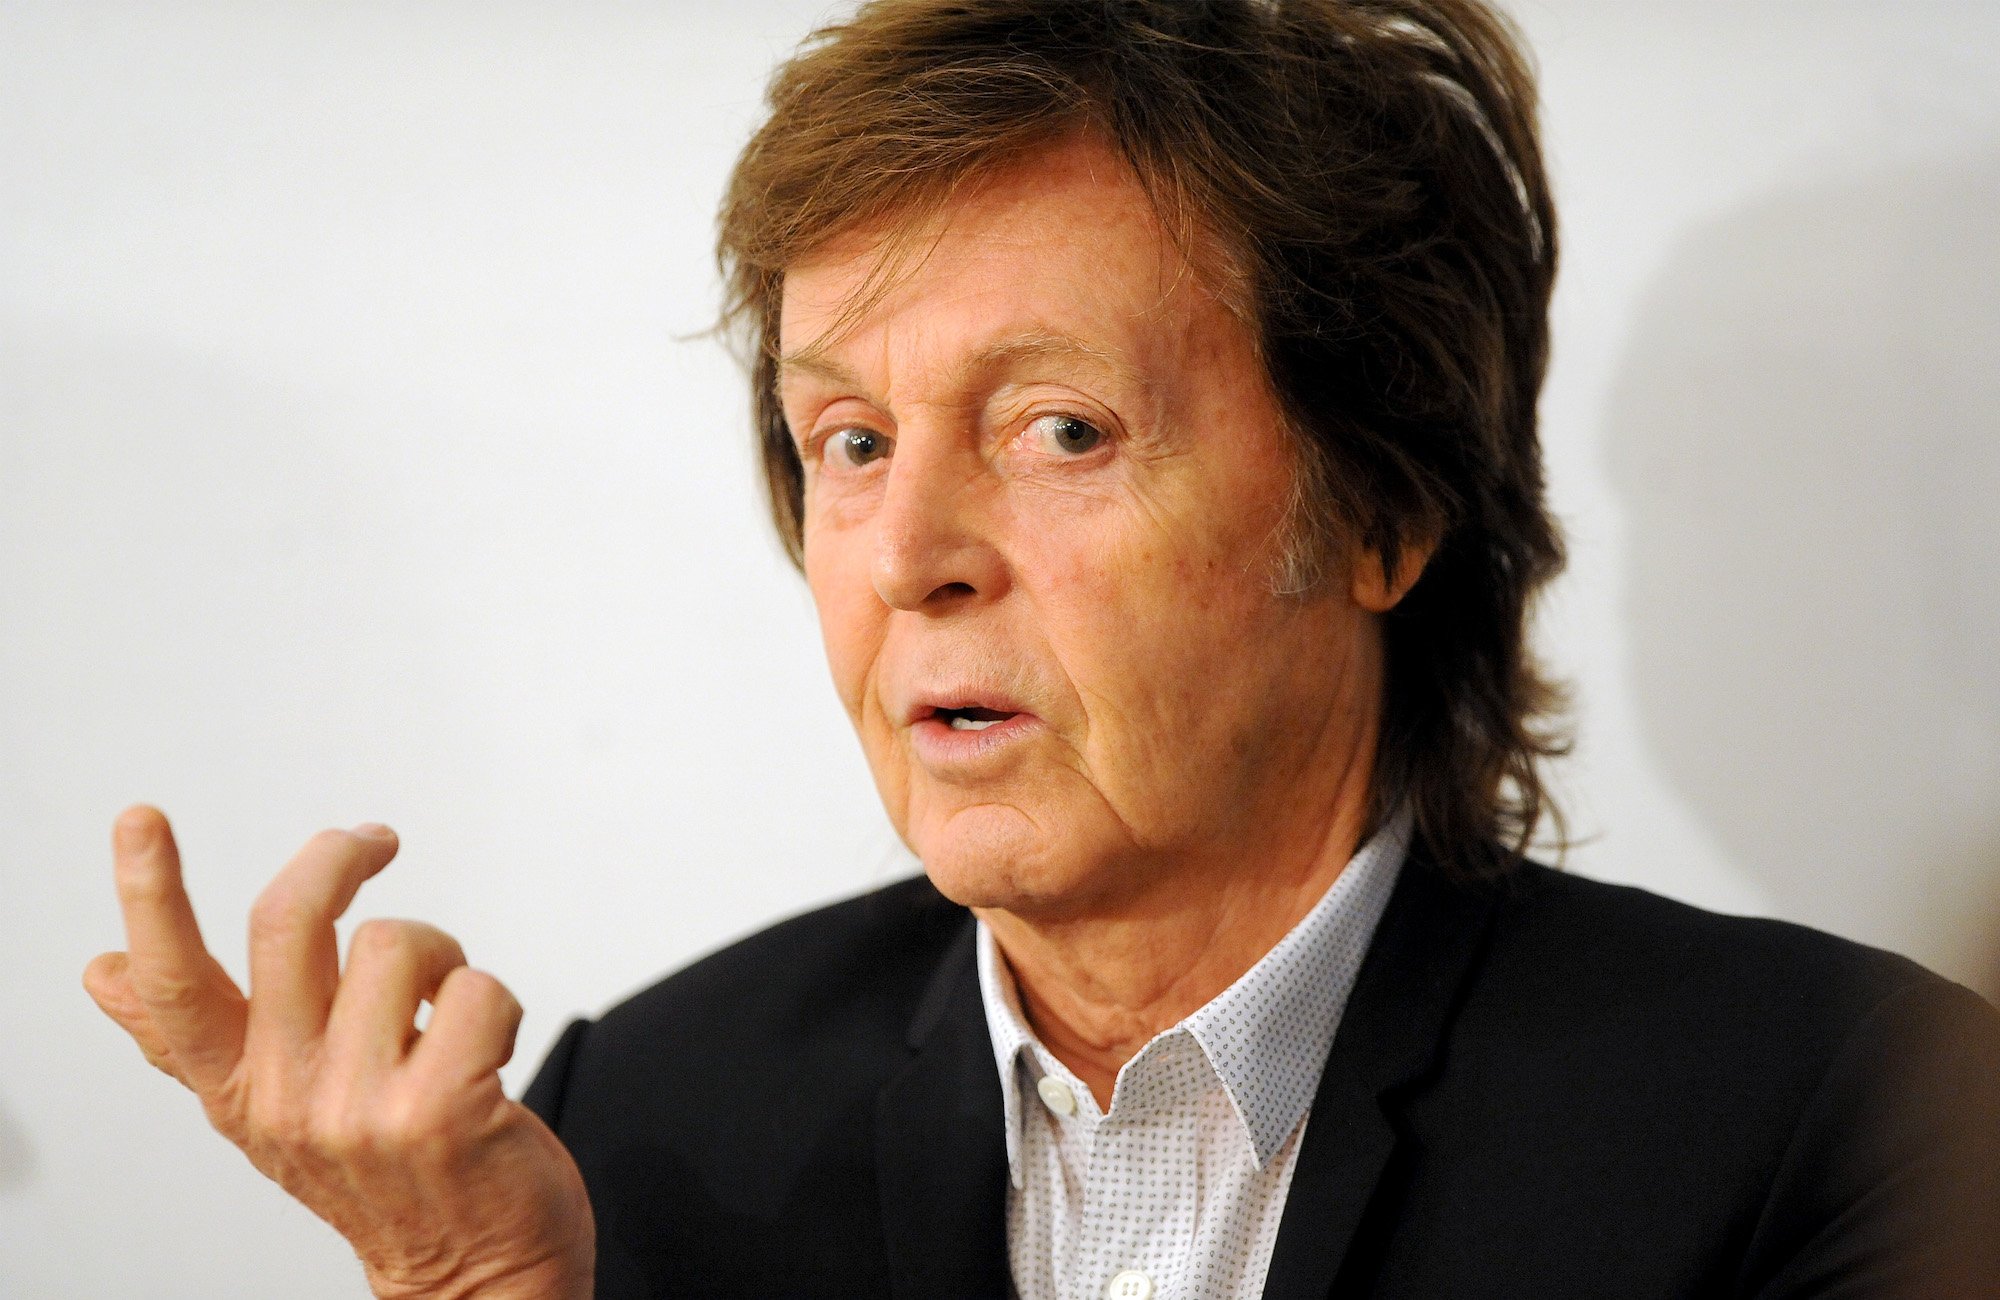 Paul McCartney discusses his song 'Hope for the Future' with Lily Cole in London, England